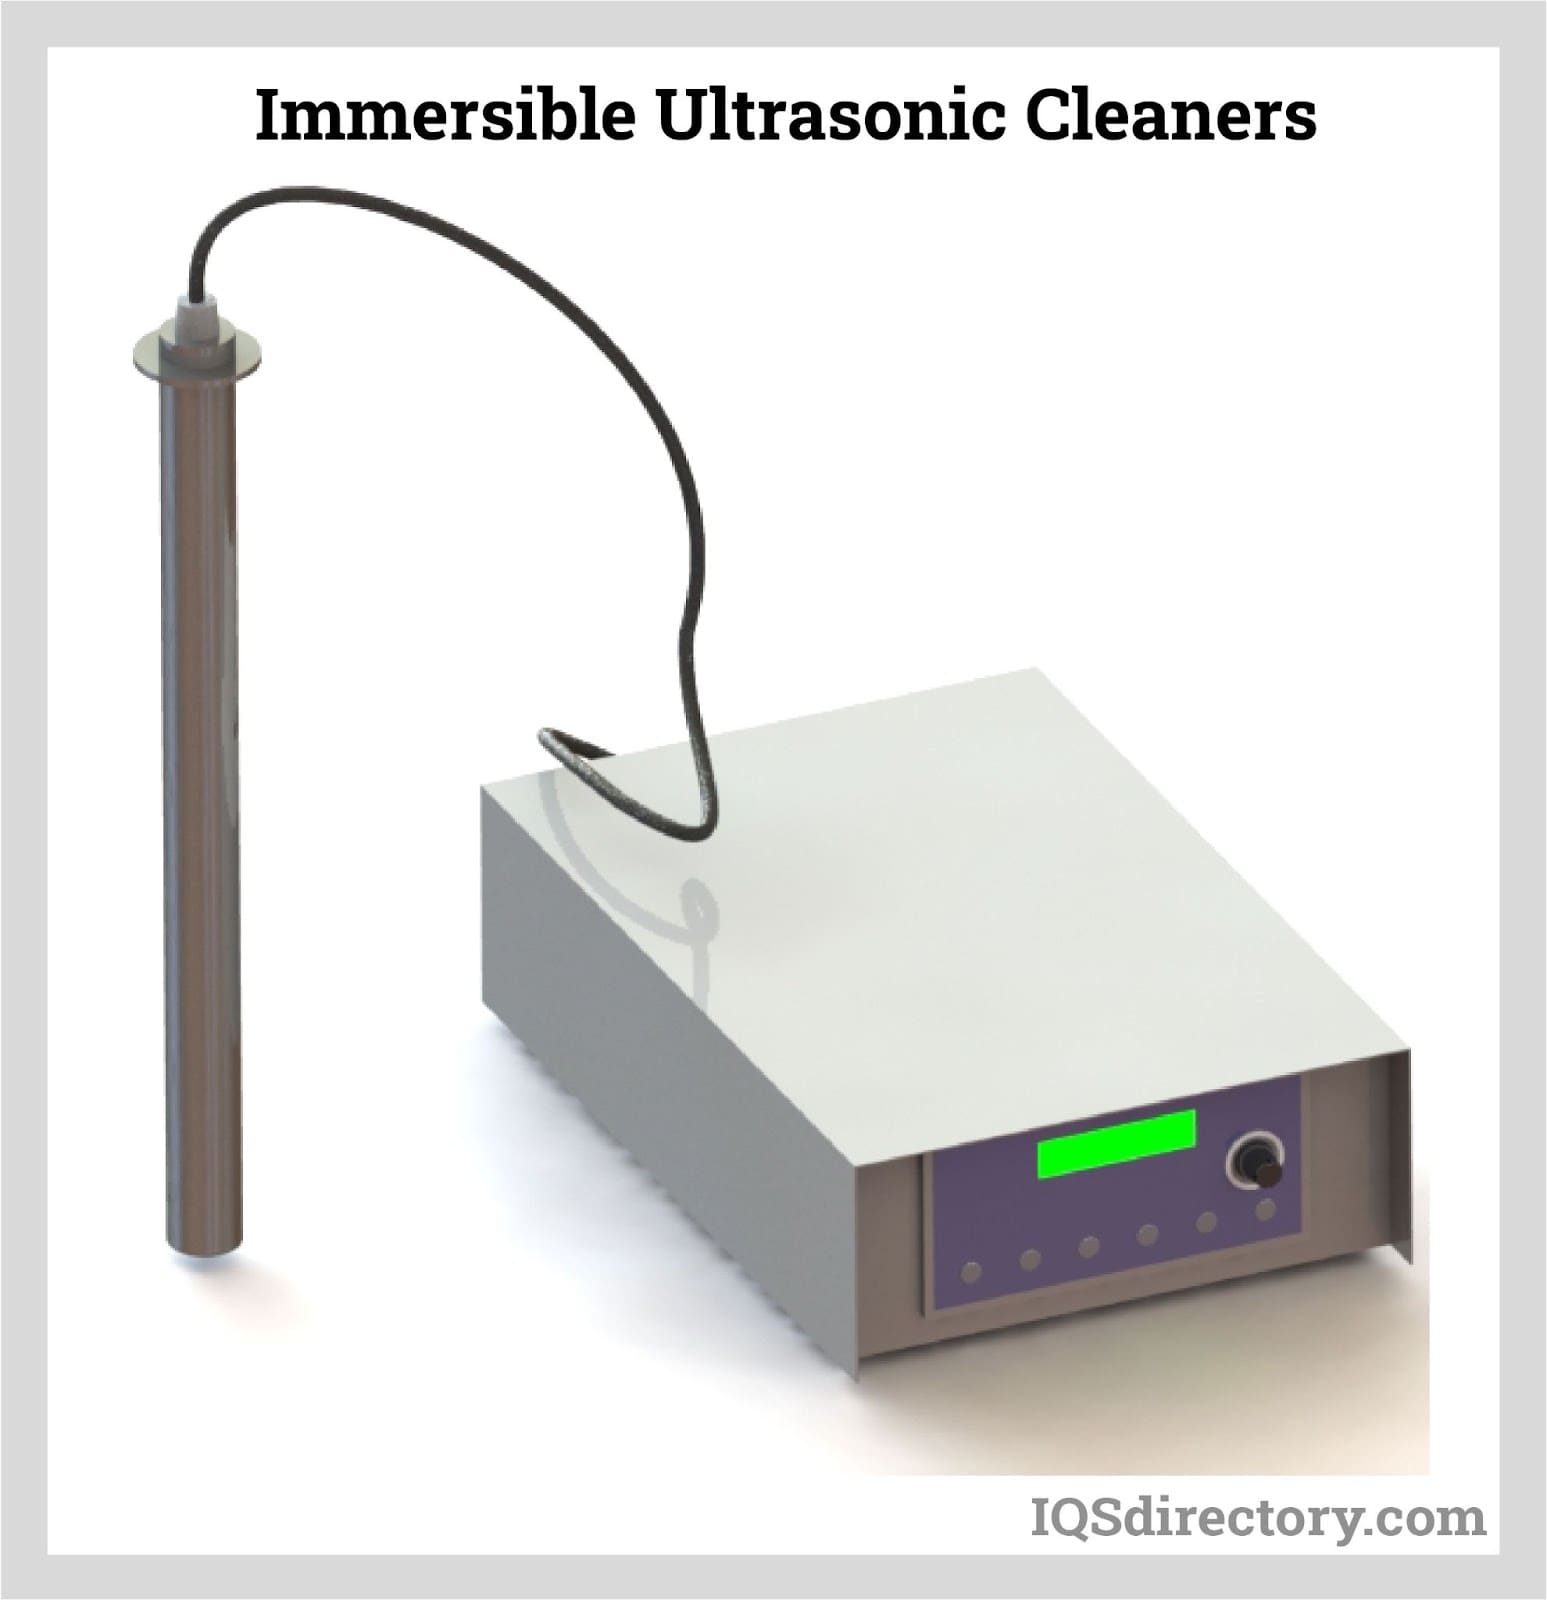 Immersible Ultrasonic Cleaners